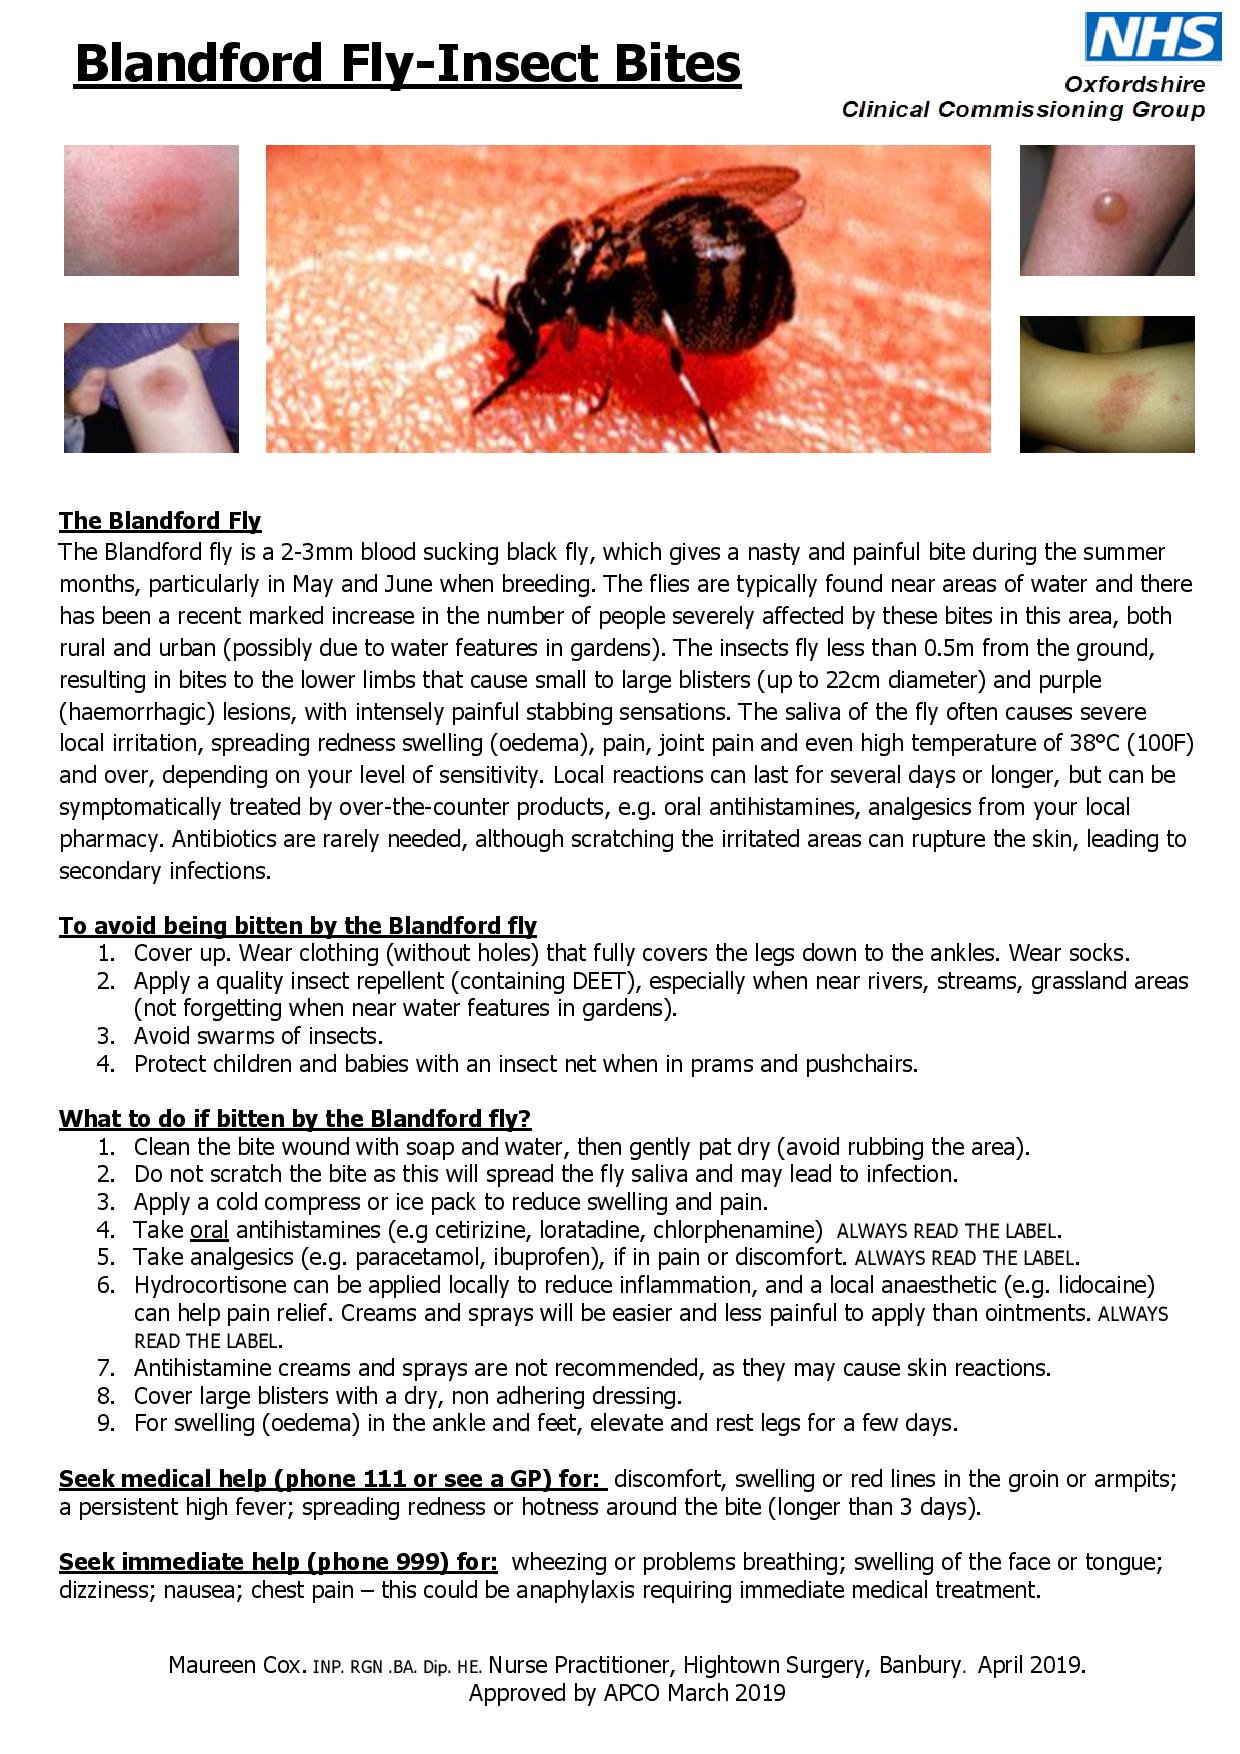 Blandford Fly Advice Poster